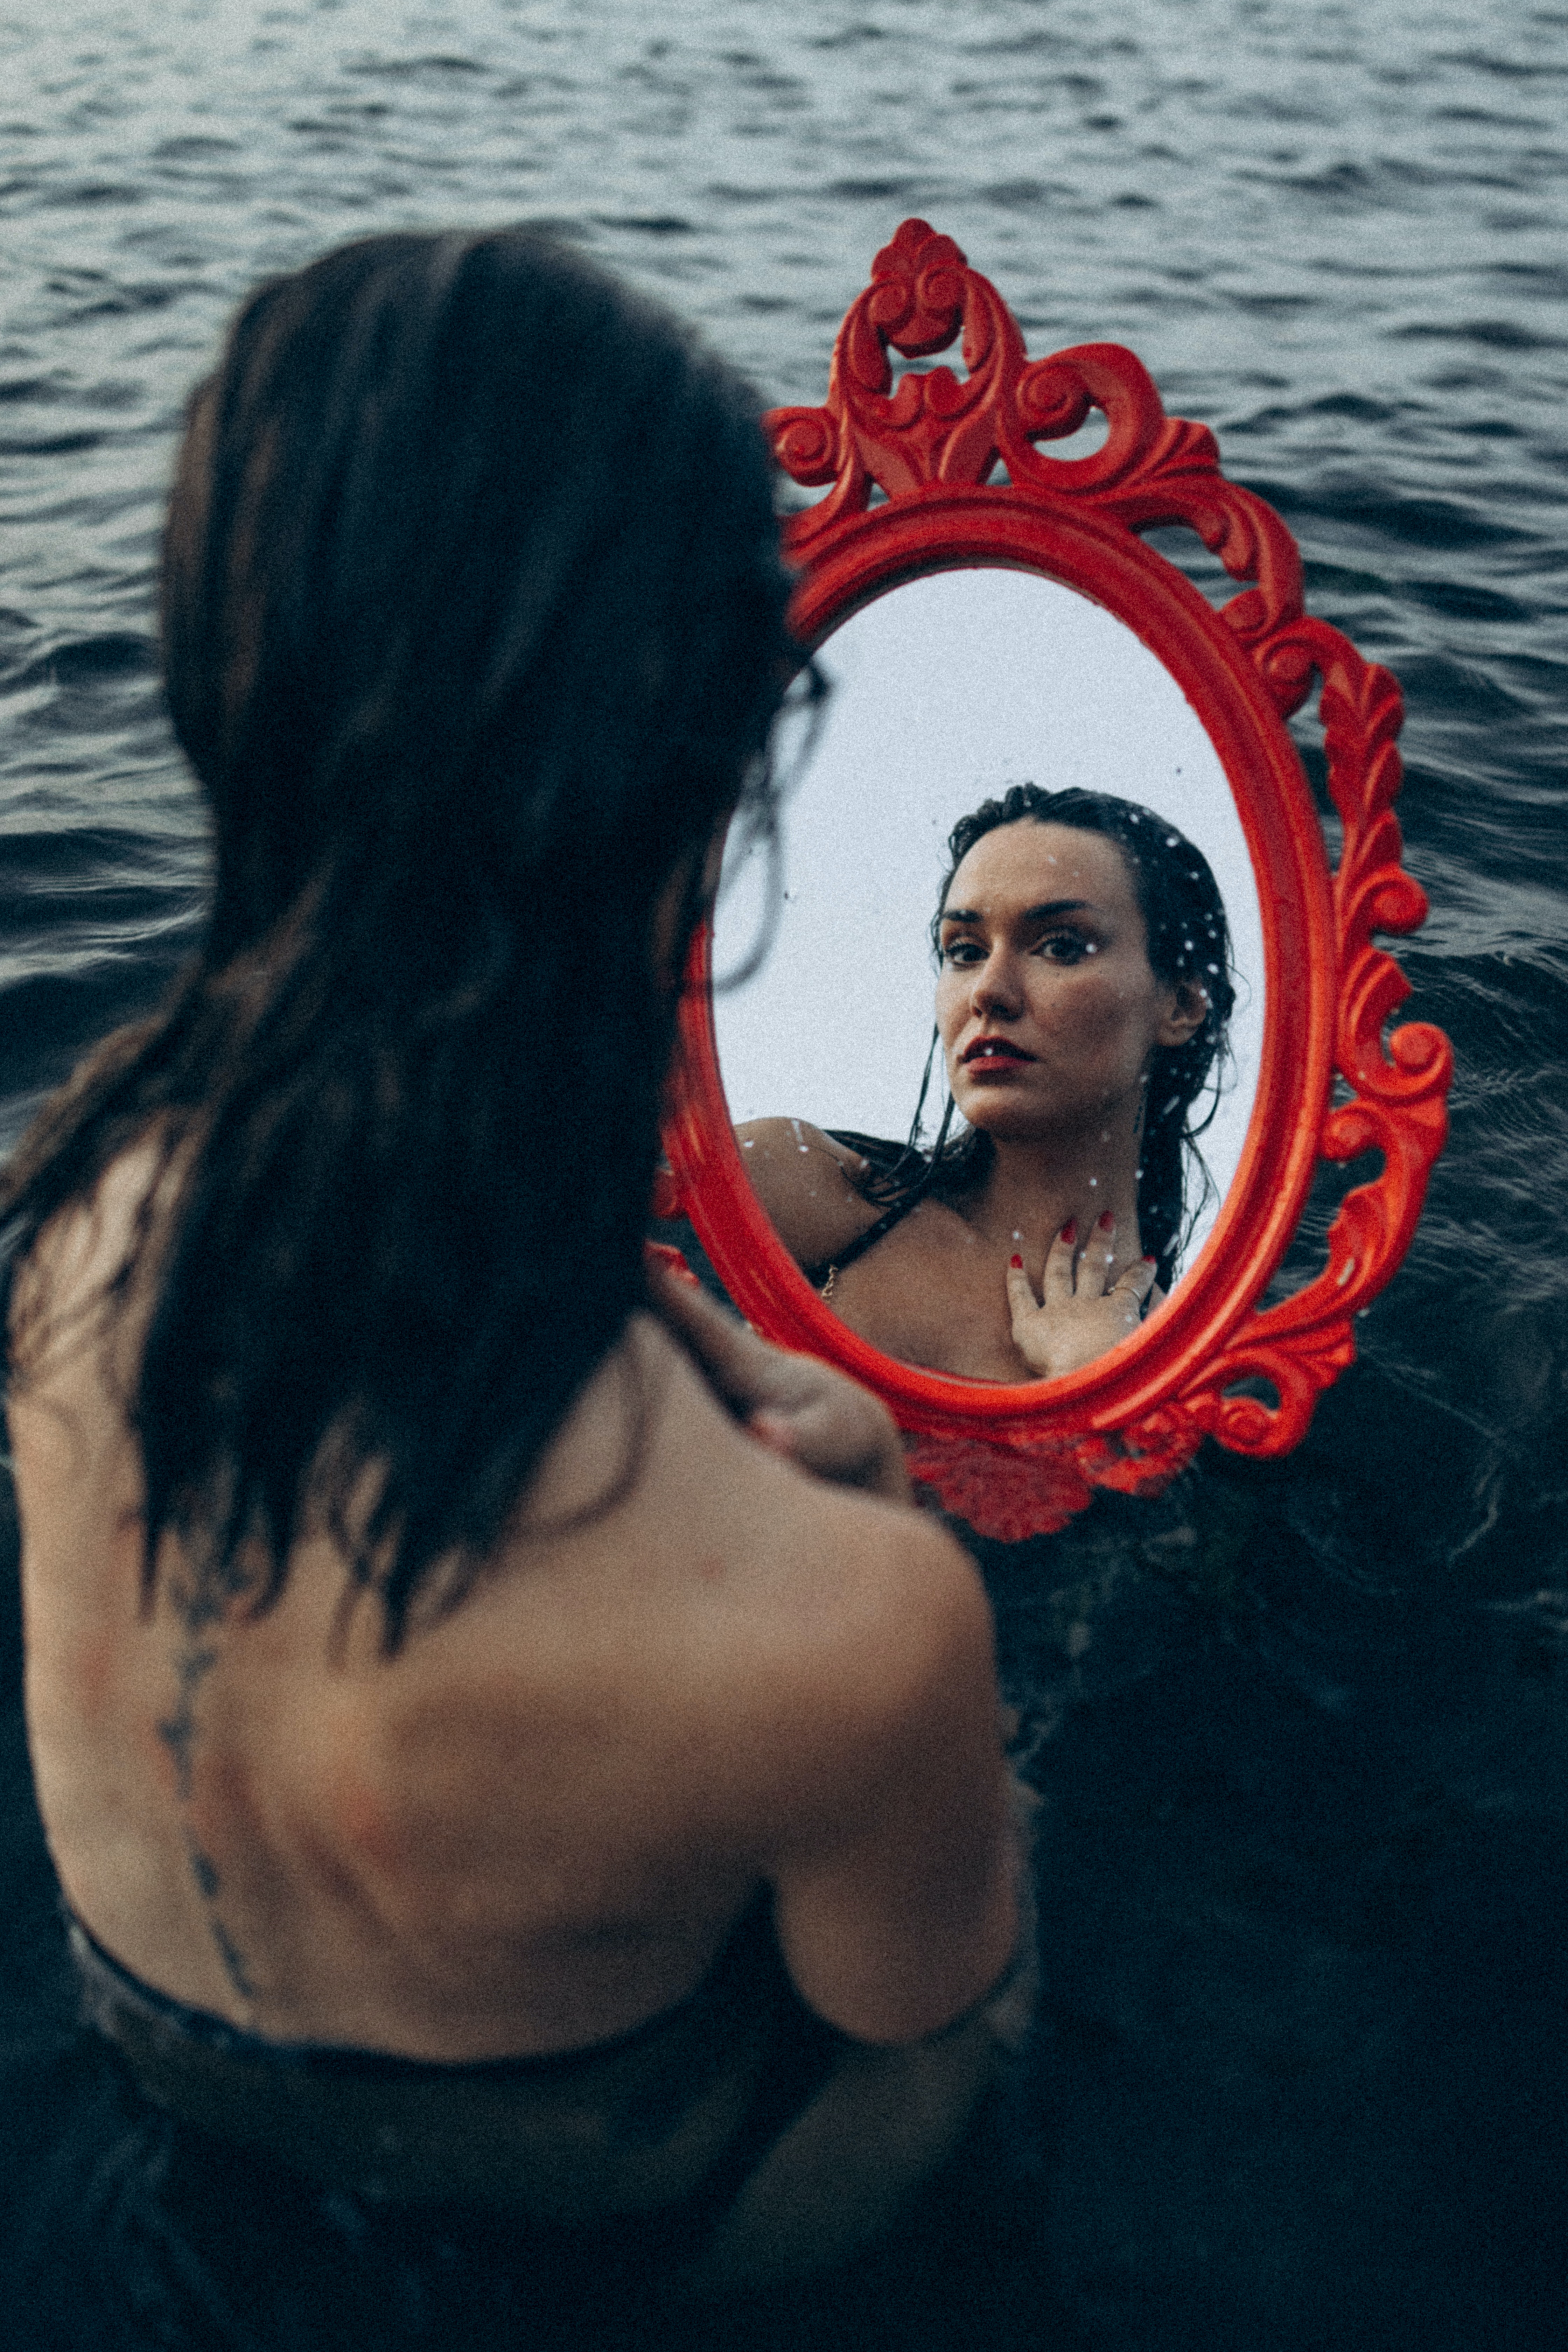 A woman looking at her reflection in a mirror while simultaneously in the ocean. | Source: Pexels